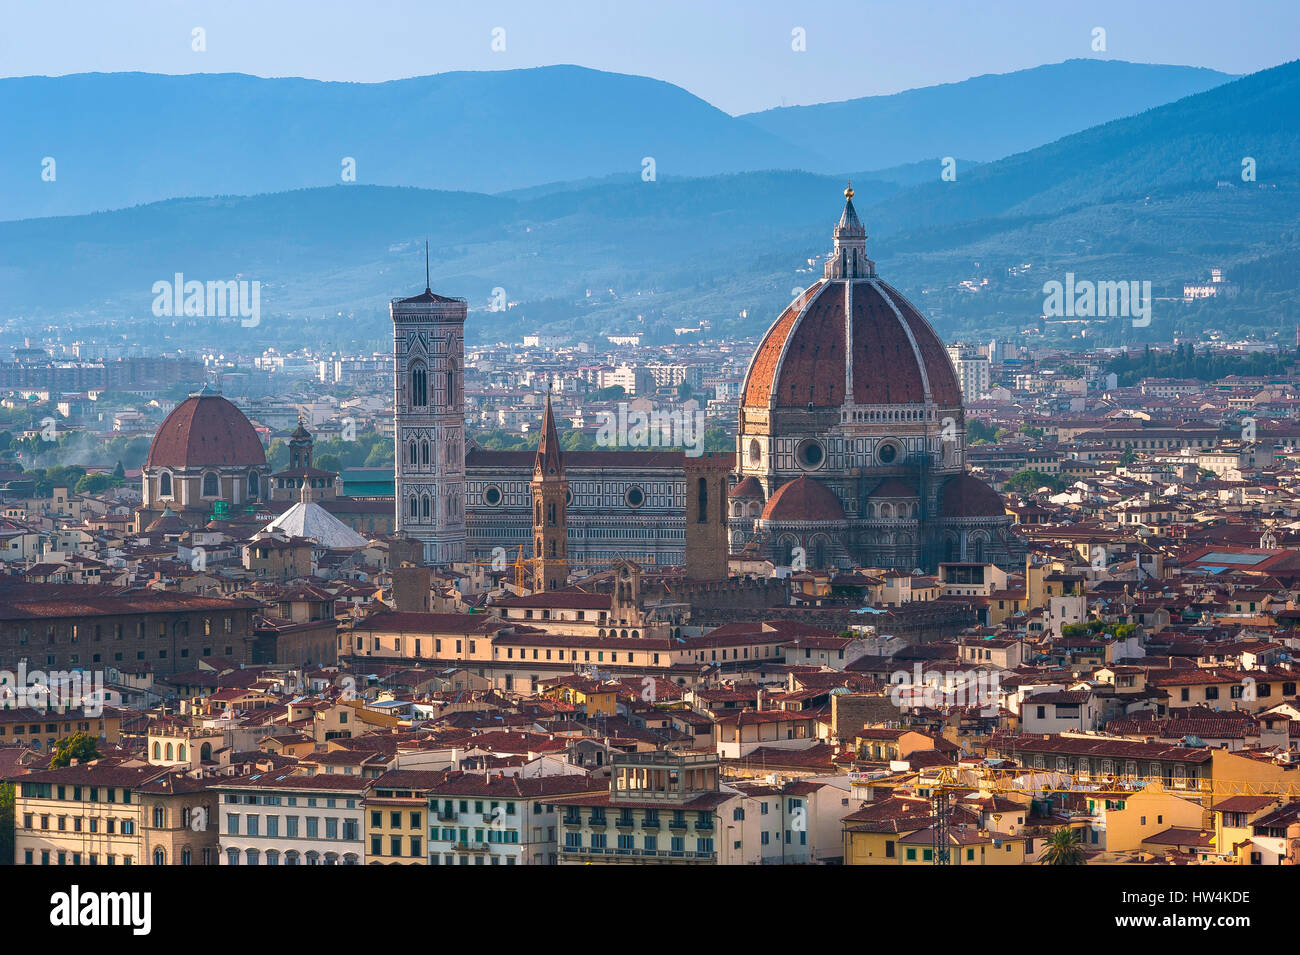 Florence cathedral, view of the Duomo with its Brunelleschi designed dome sited in the center of the city of Florence against Tuscany hills, Italy Stock Photo